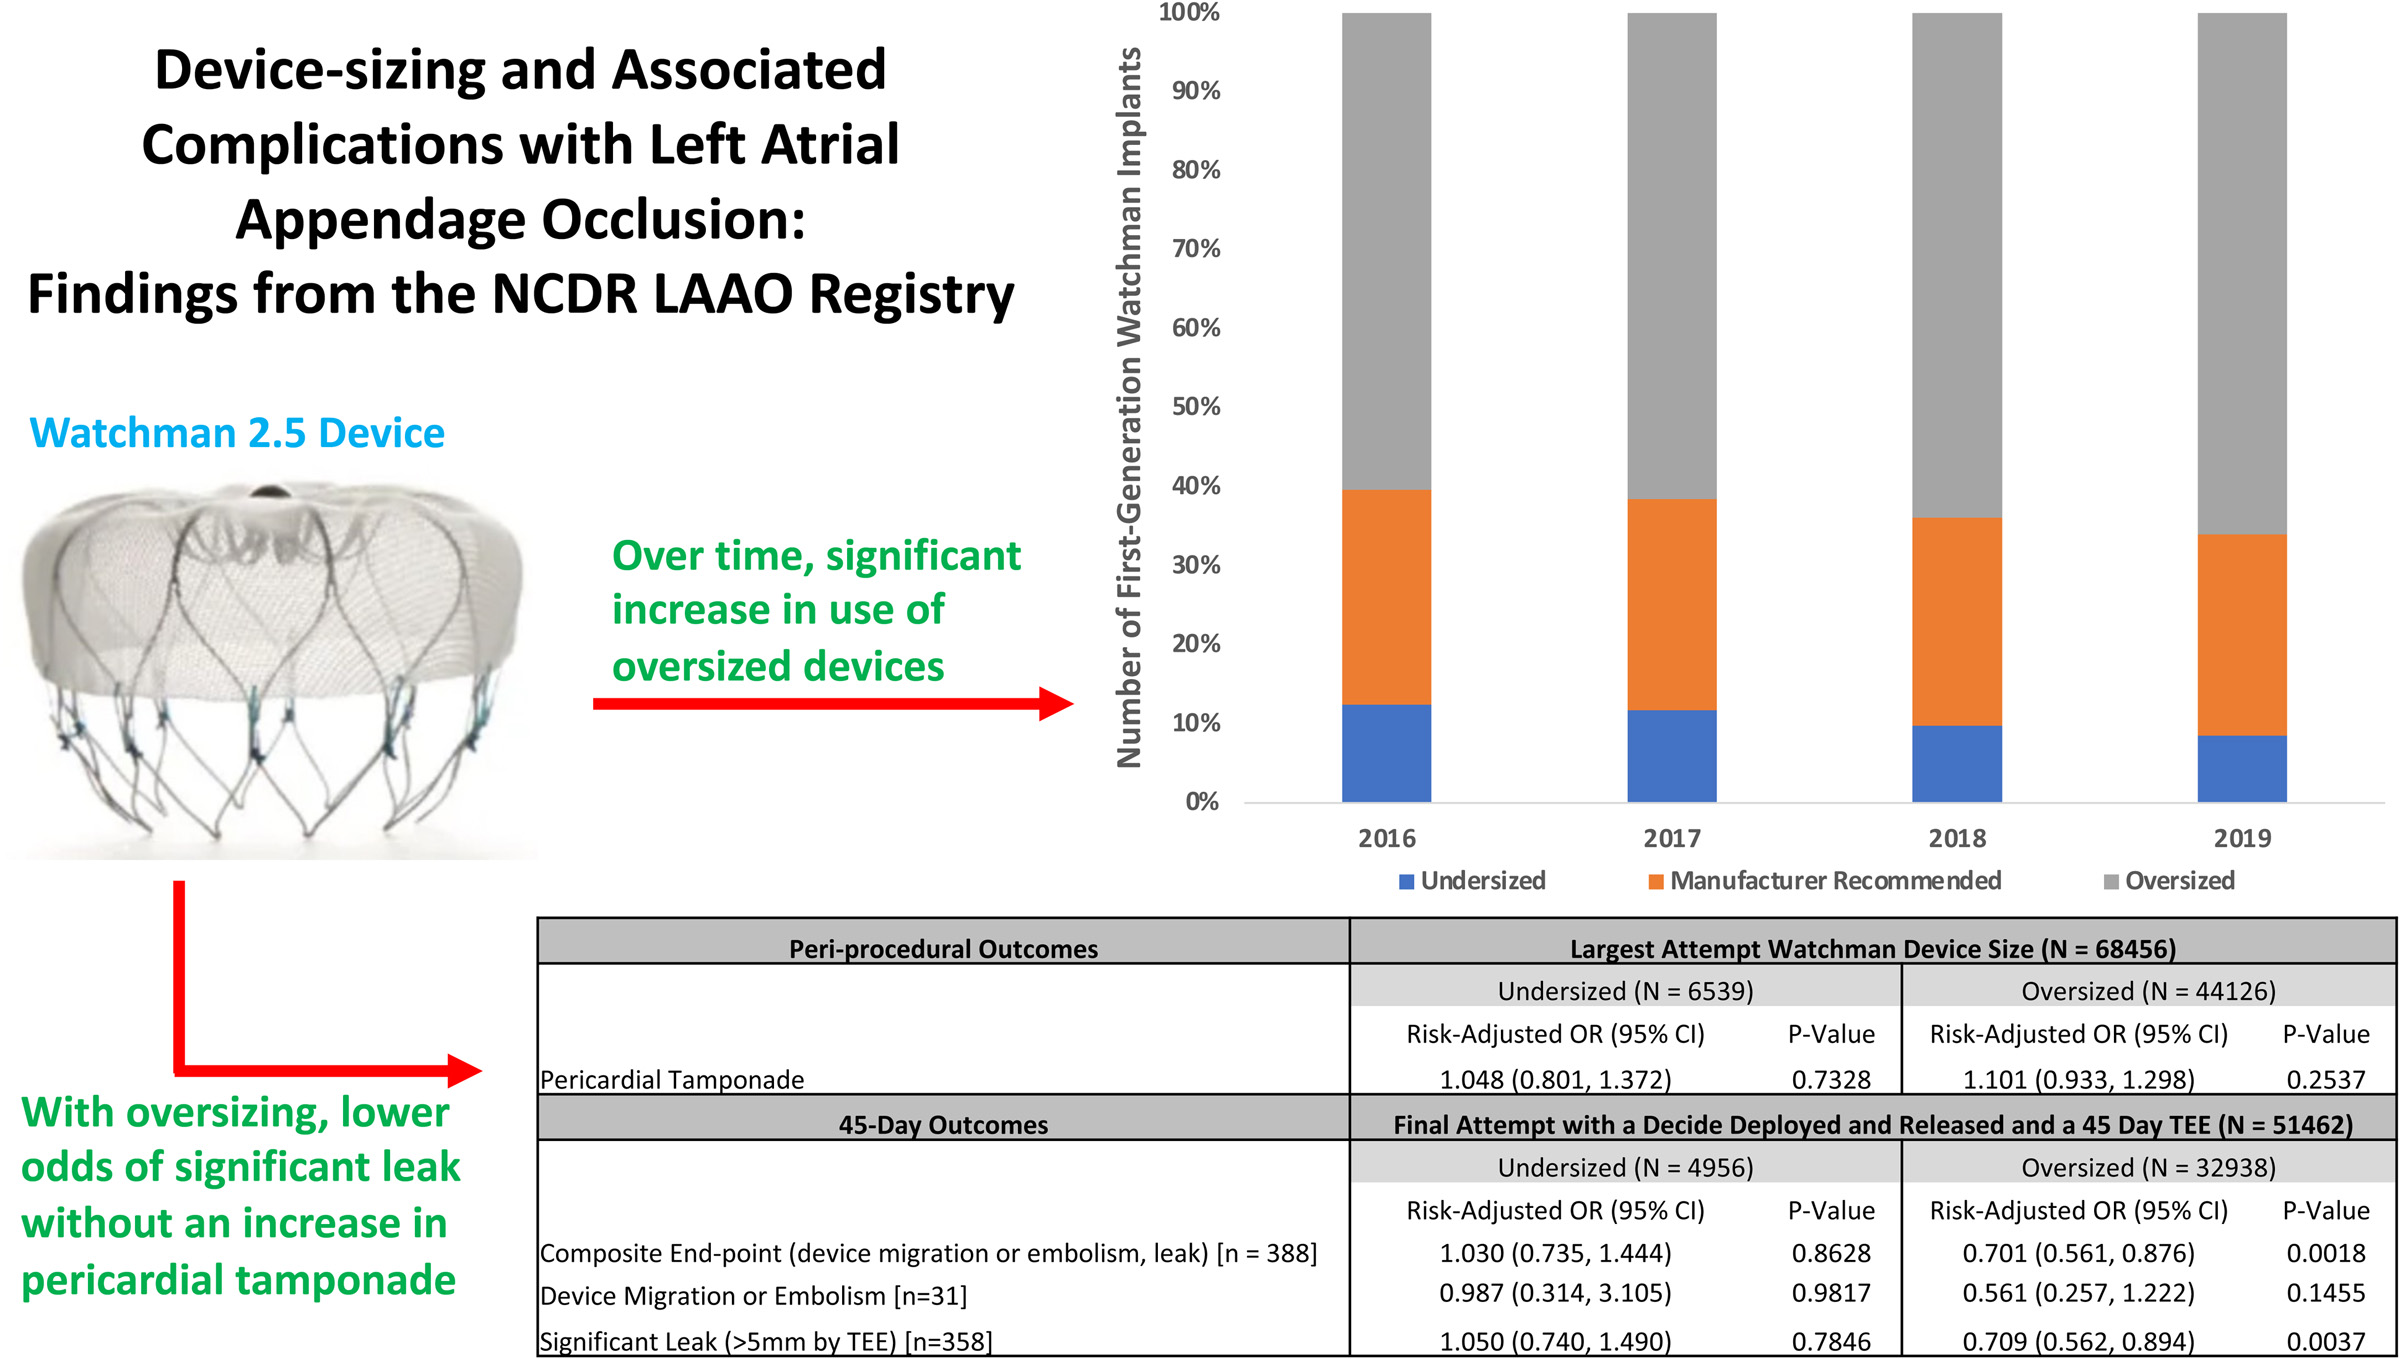 Device-Sizing and Associated Complications With Left Atrial Appendage Occlusion: Findings From the NCDR LAAO Registry